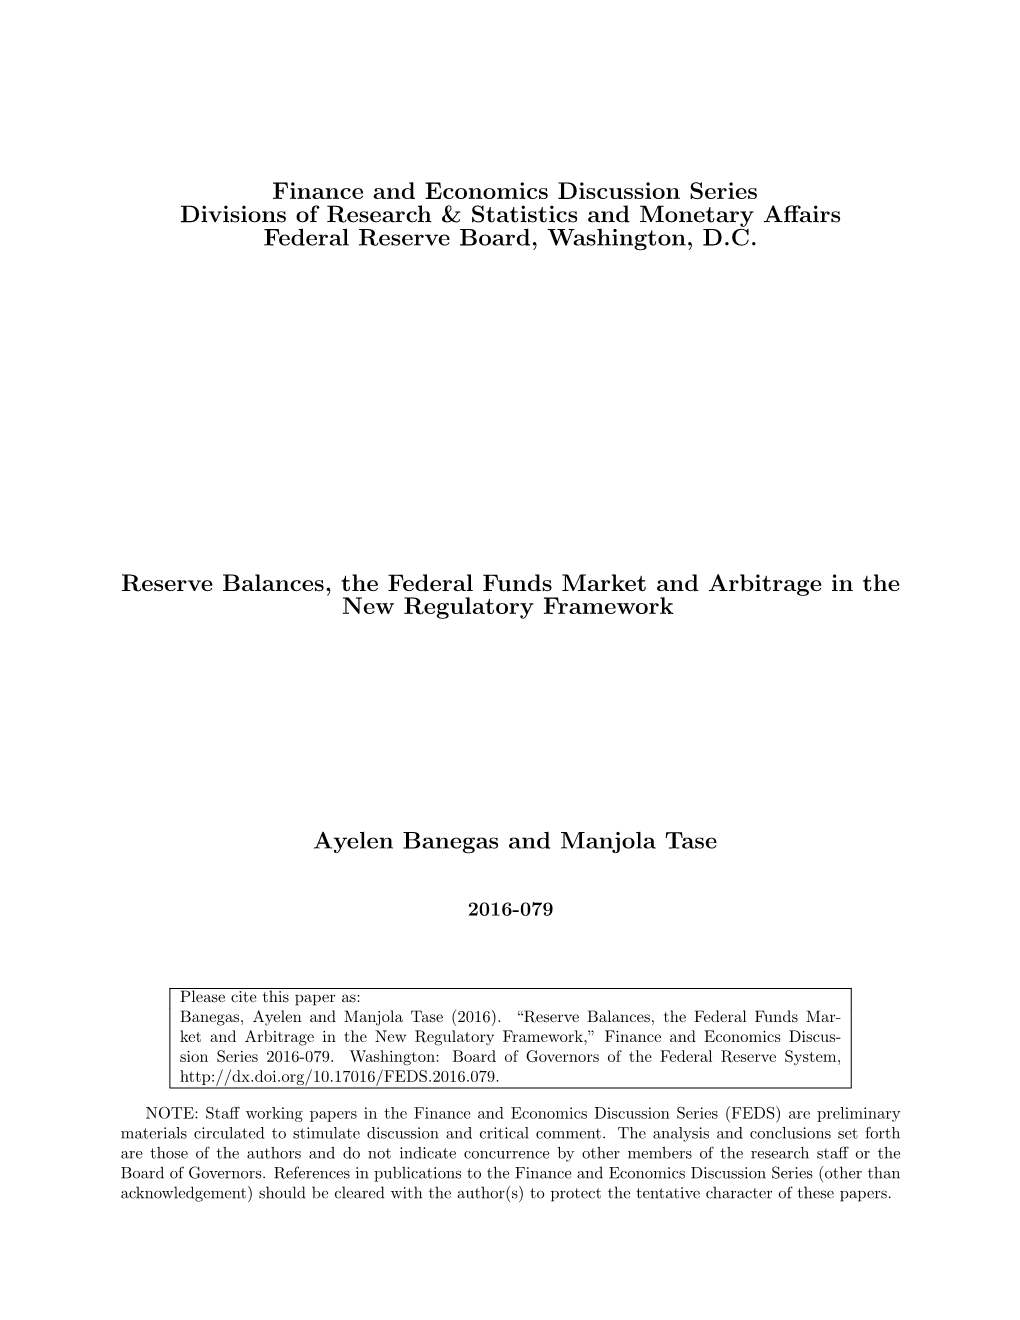 Reserve Balances, the Federal Funds Market and Arbitrage in the New Regulatory Framework